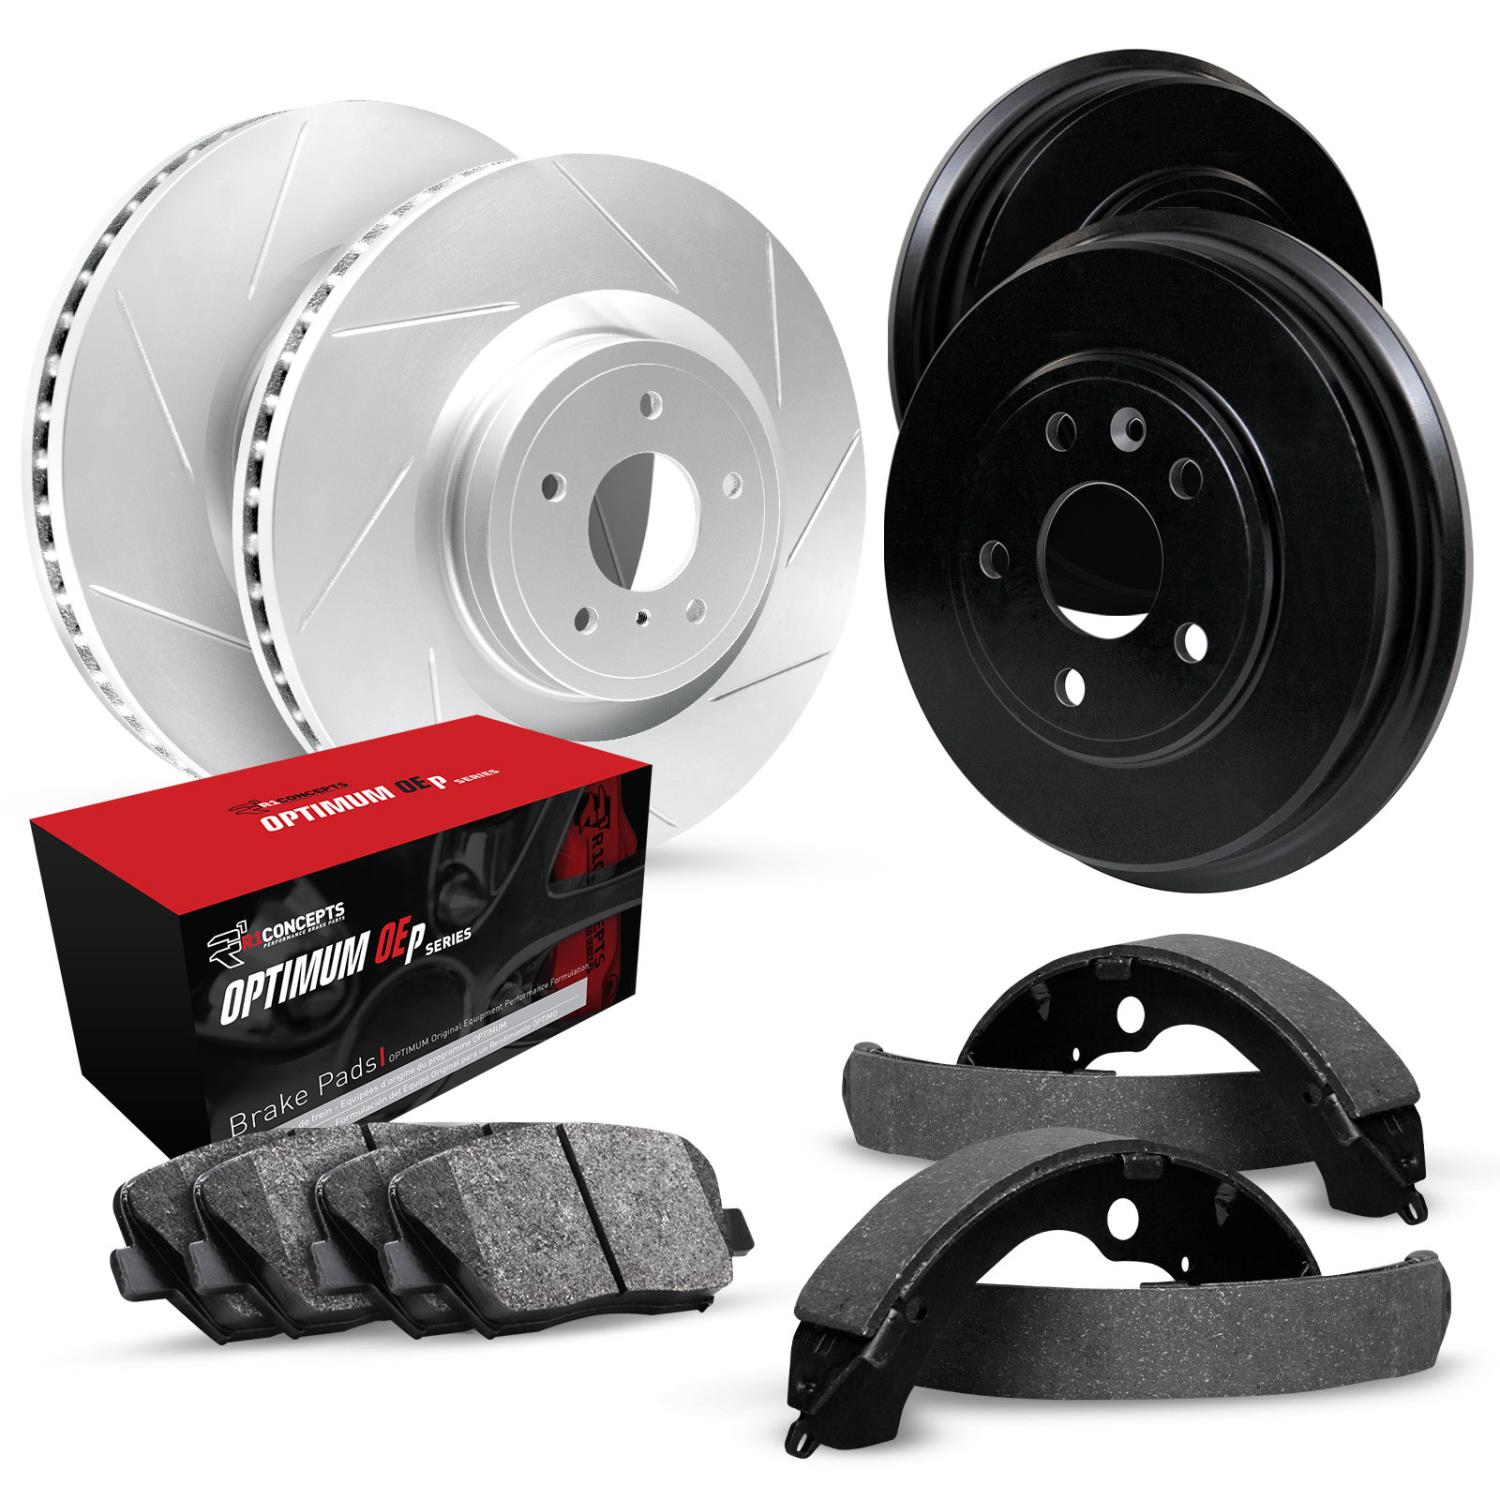 GEO-Carbon Slotted Brake Rotor & Drum Set w/Optimum OE Pads & Shoes, 2000-2004 Ford/Lincoln/Mercury/Mazda